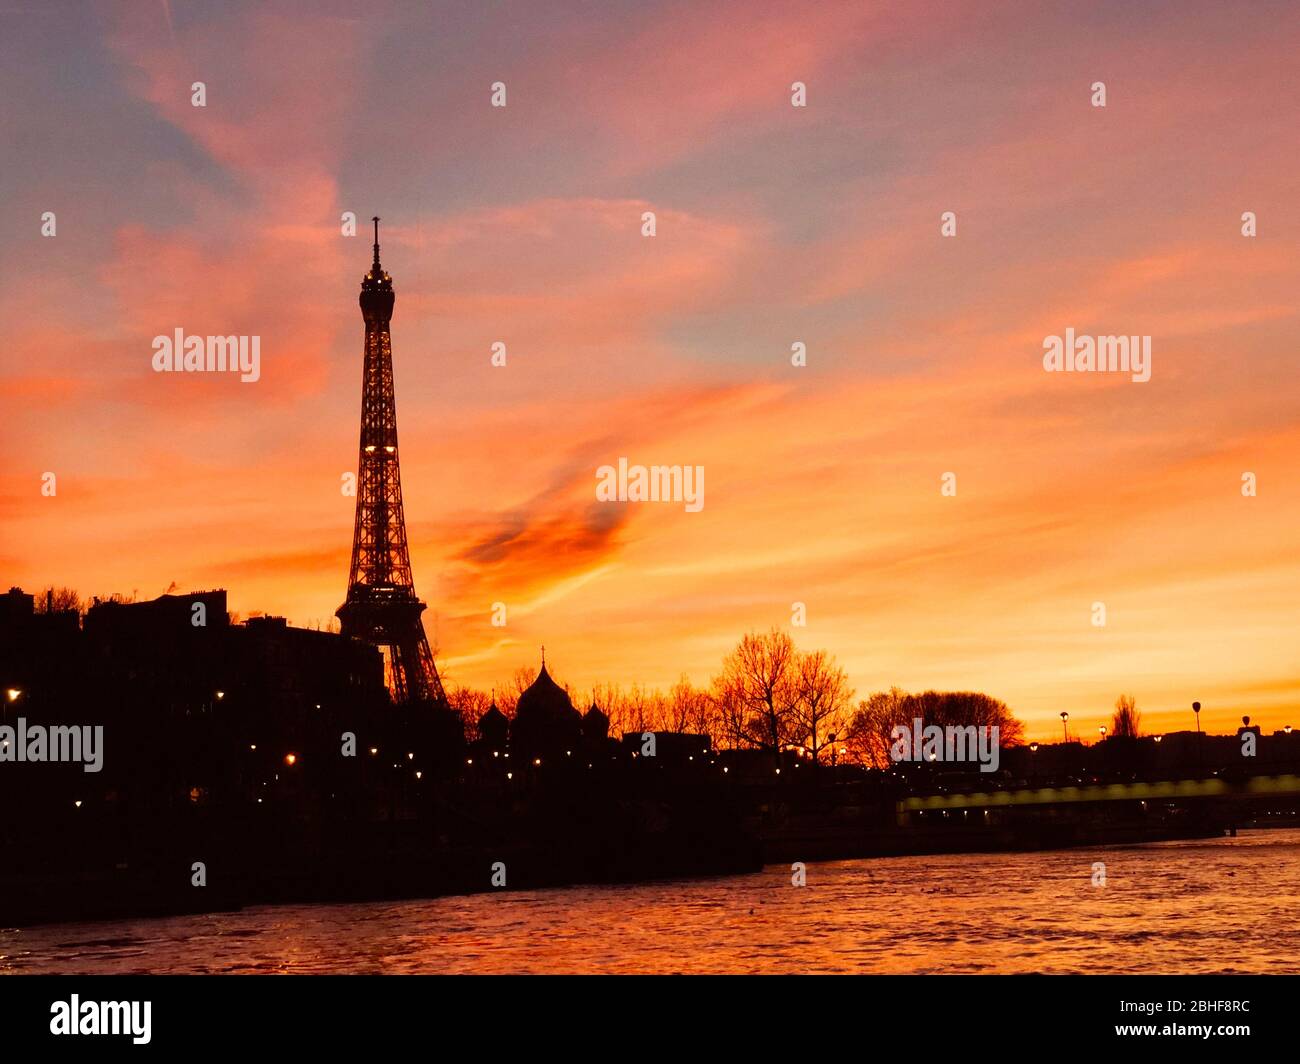 Eiffel Tower over the sunset in Paris, France Stock Photo